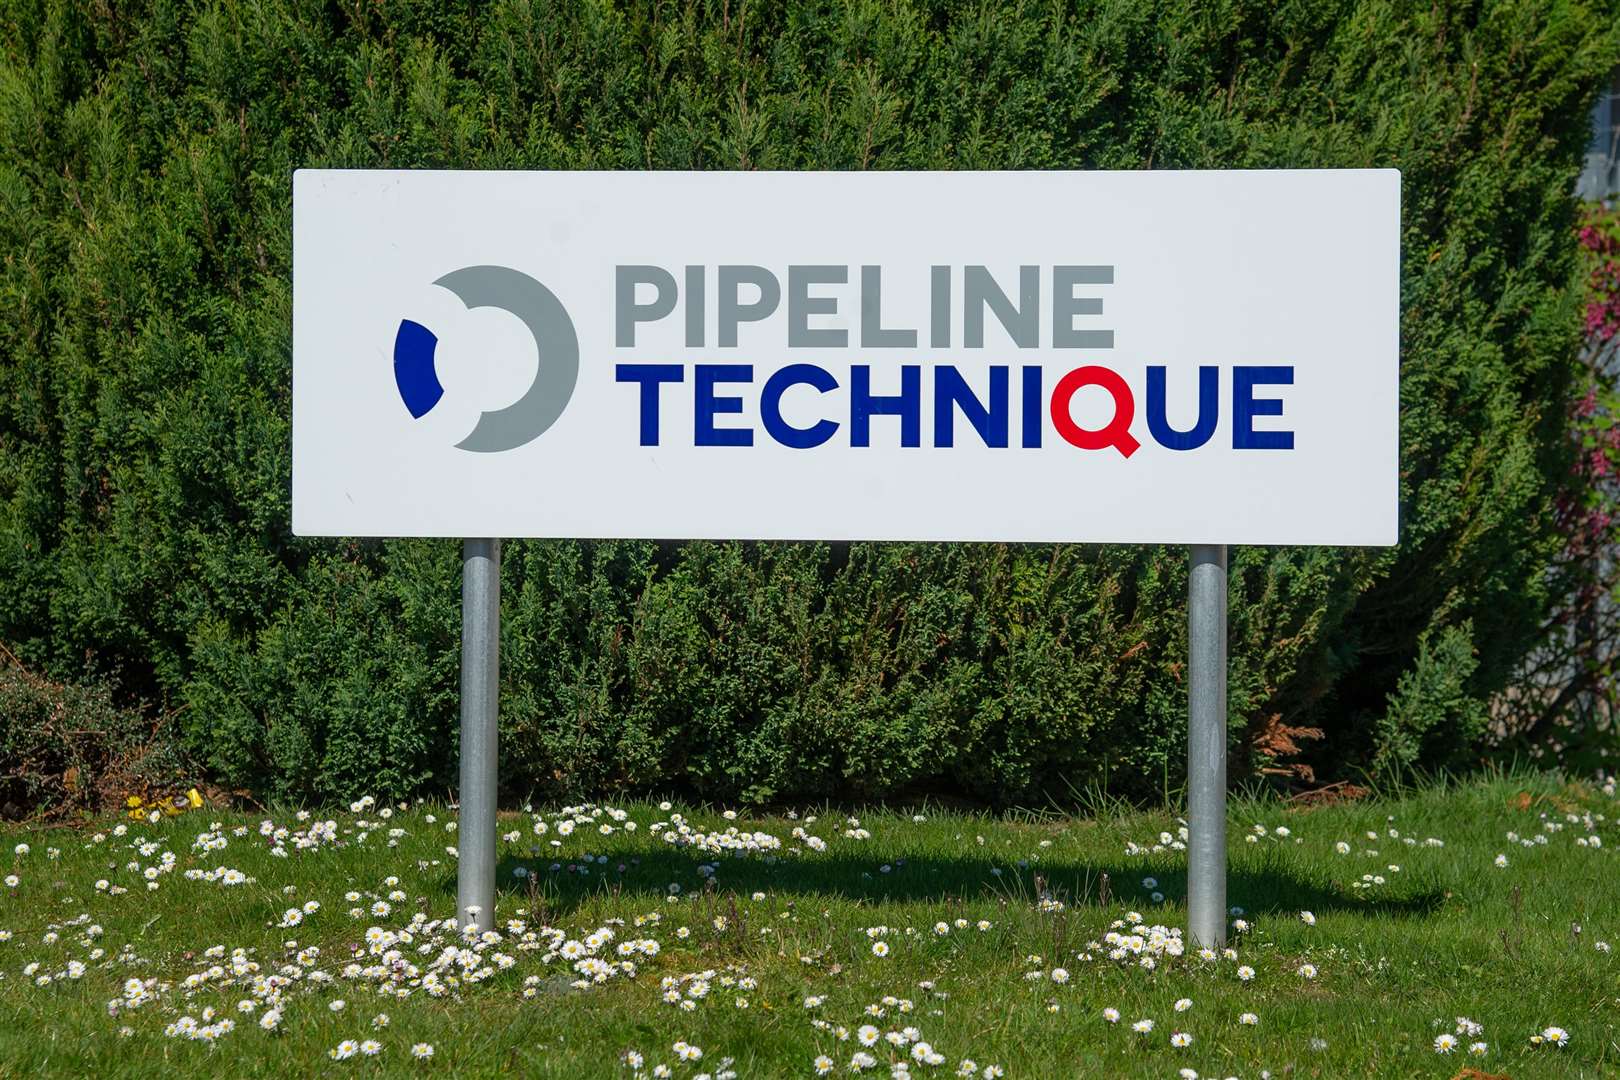 Pipeline Technique will provide welding and coating services for SubSea 7